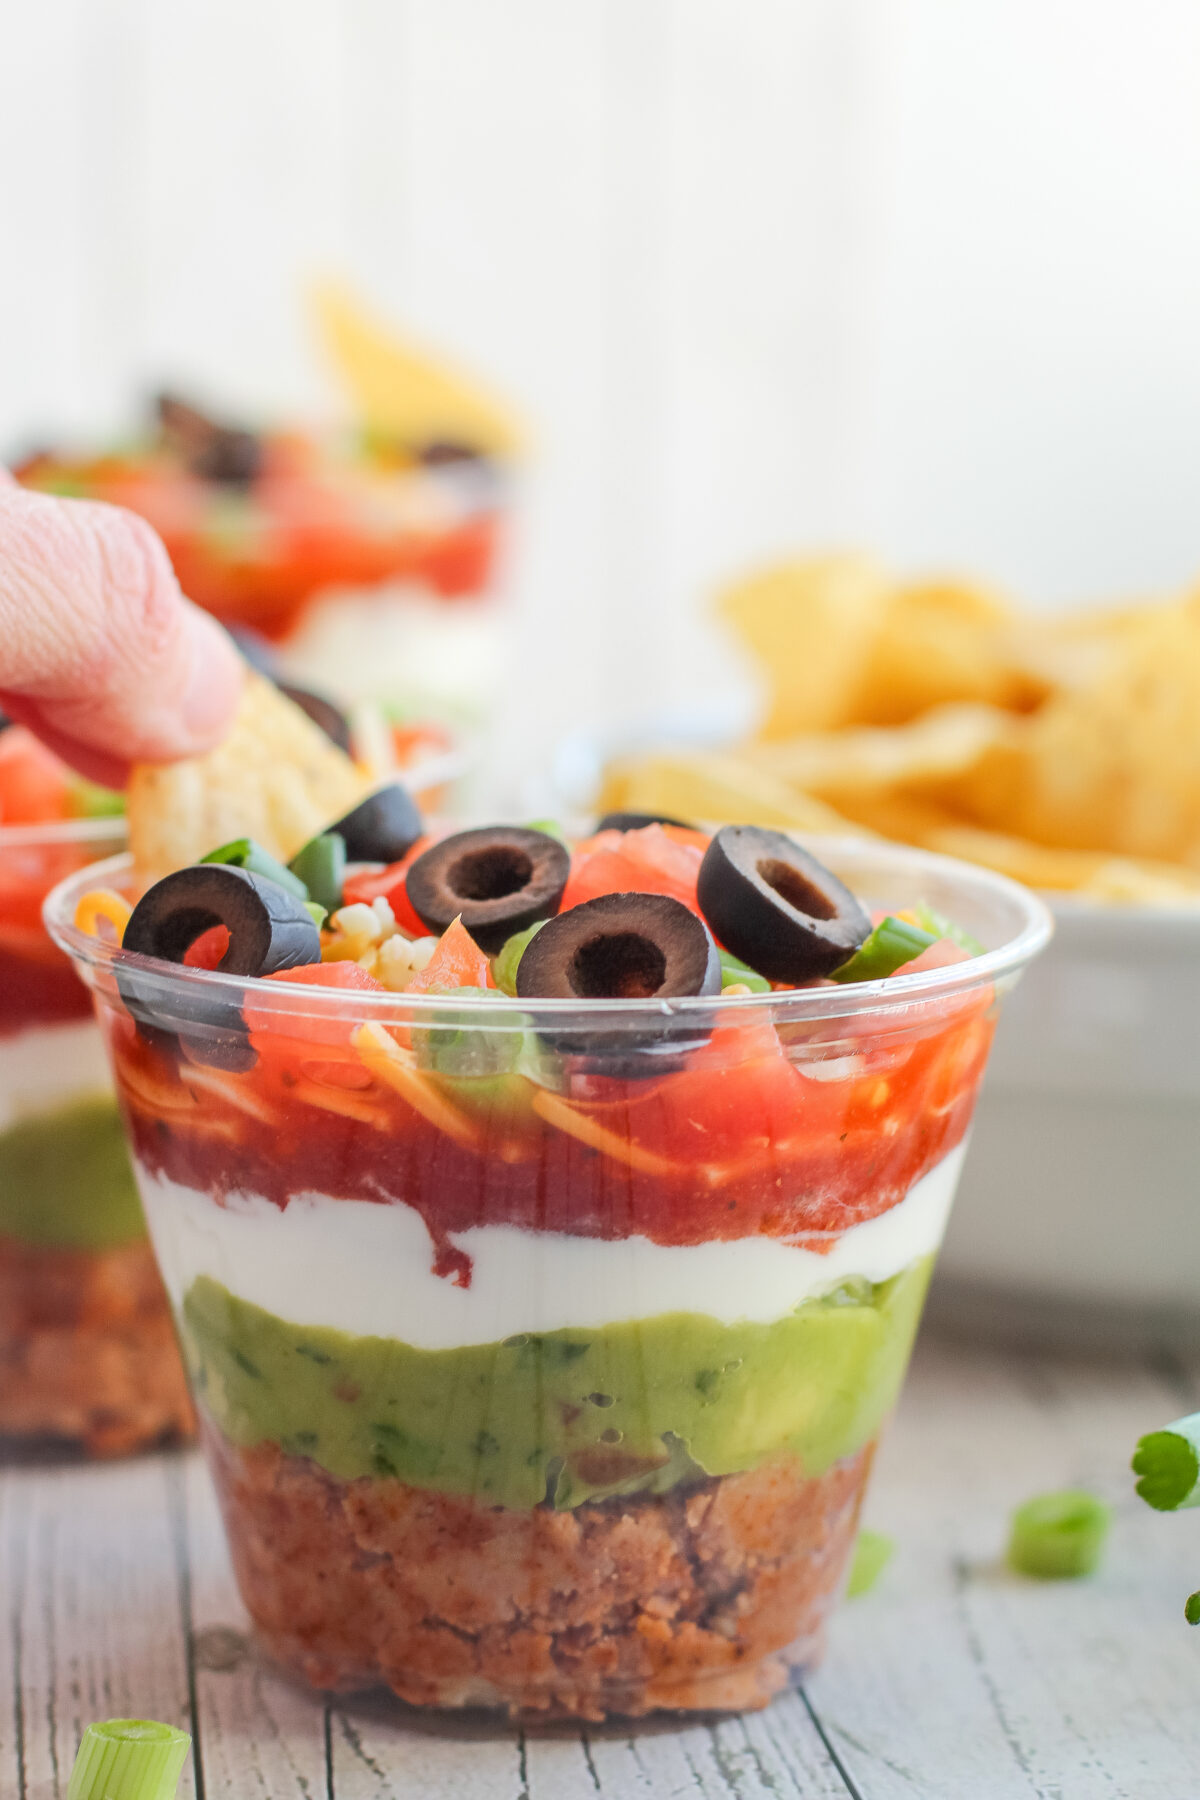 Looking for an easy individual appetizer recipe? Try out our 7 layer dip cups! Simple and delicious, it's sure to be a hit at any party!